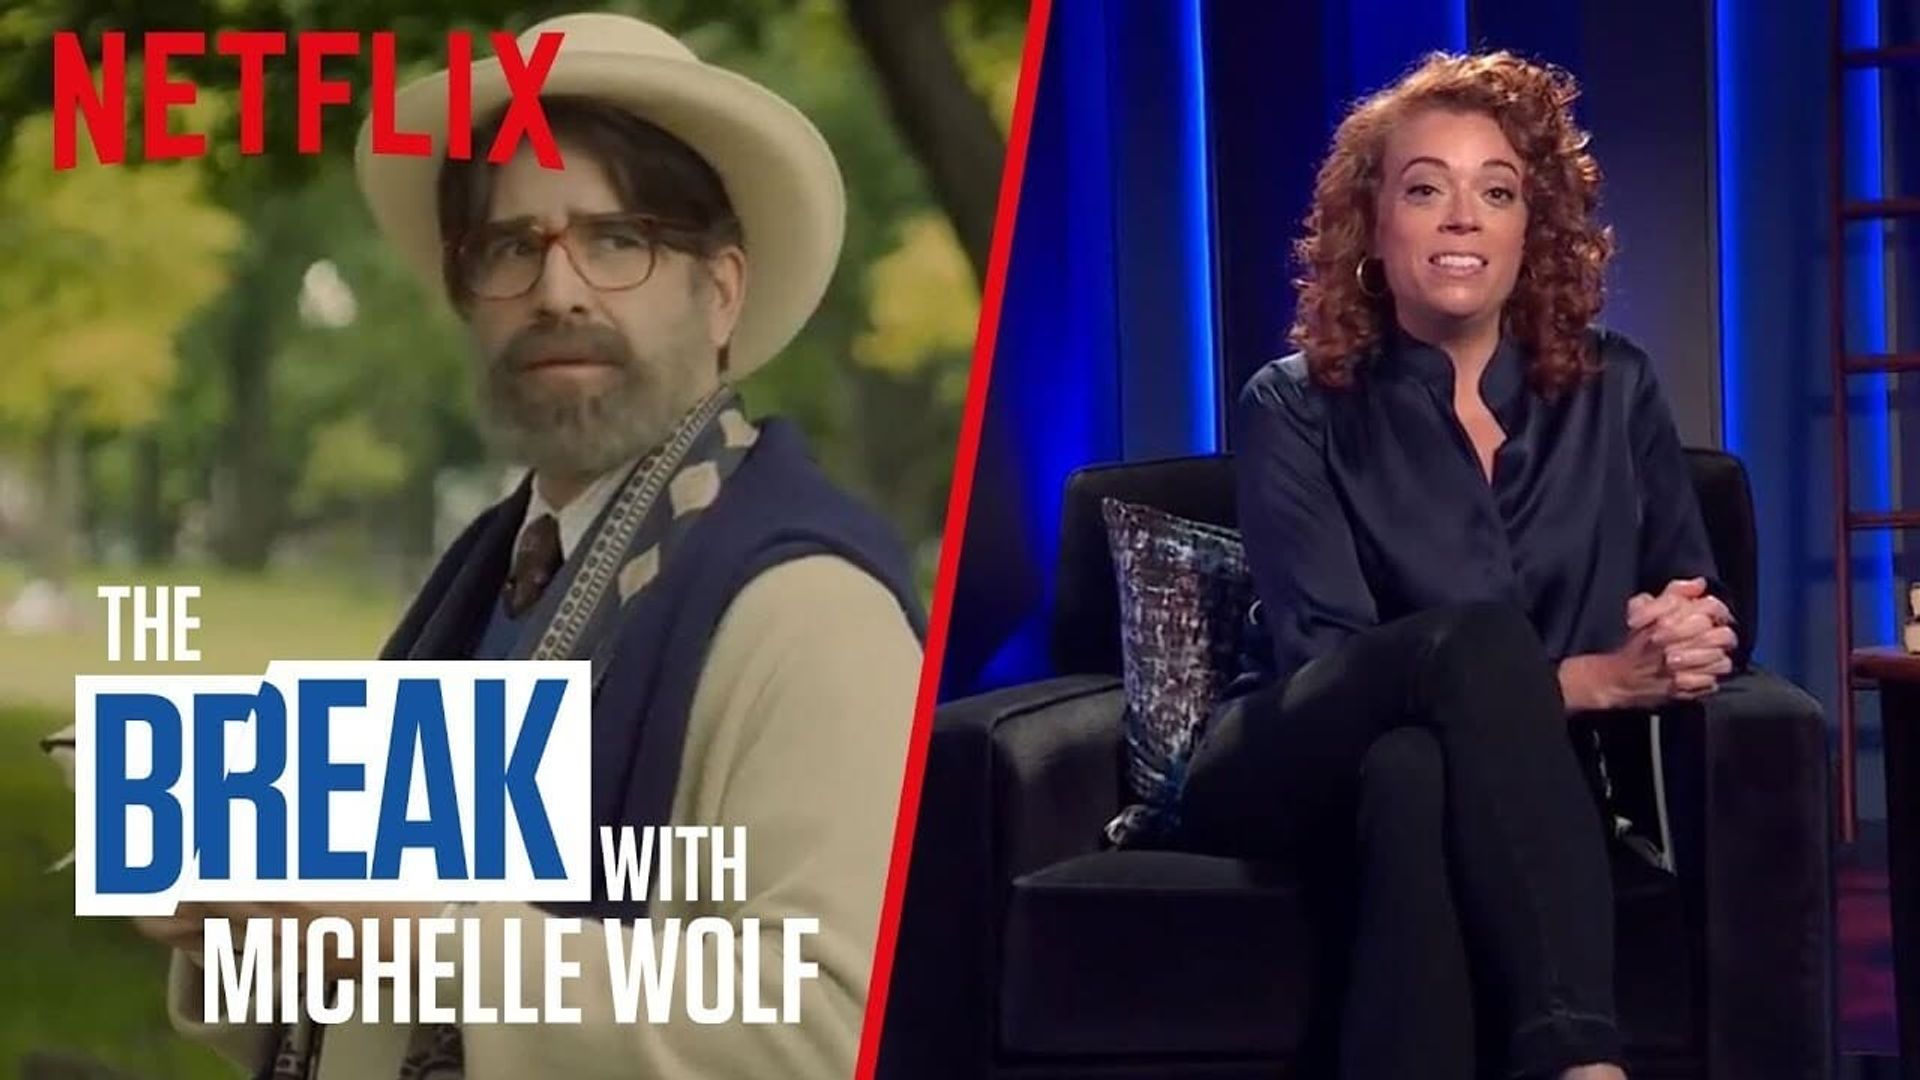 The Break with Michelle Wolf background